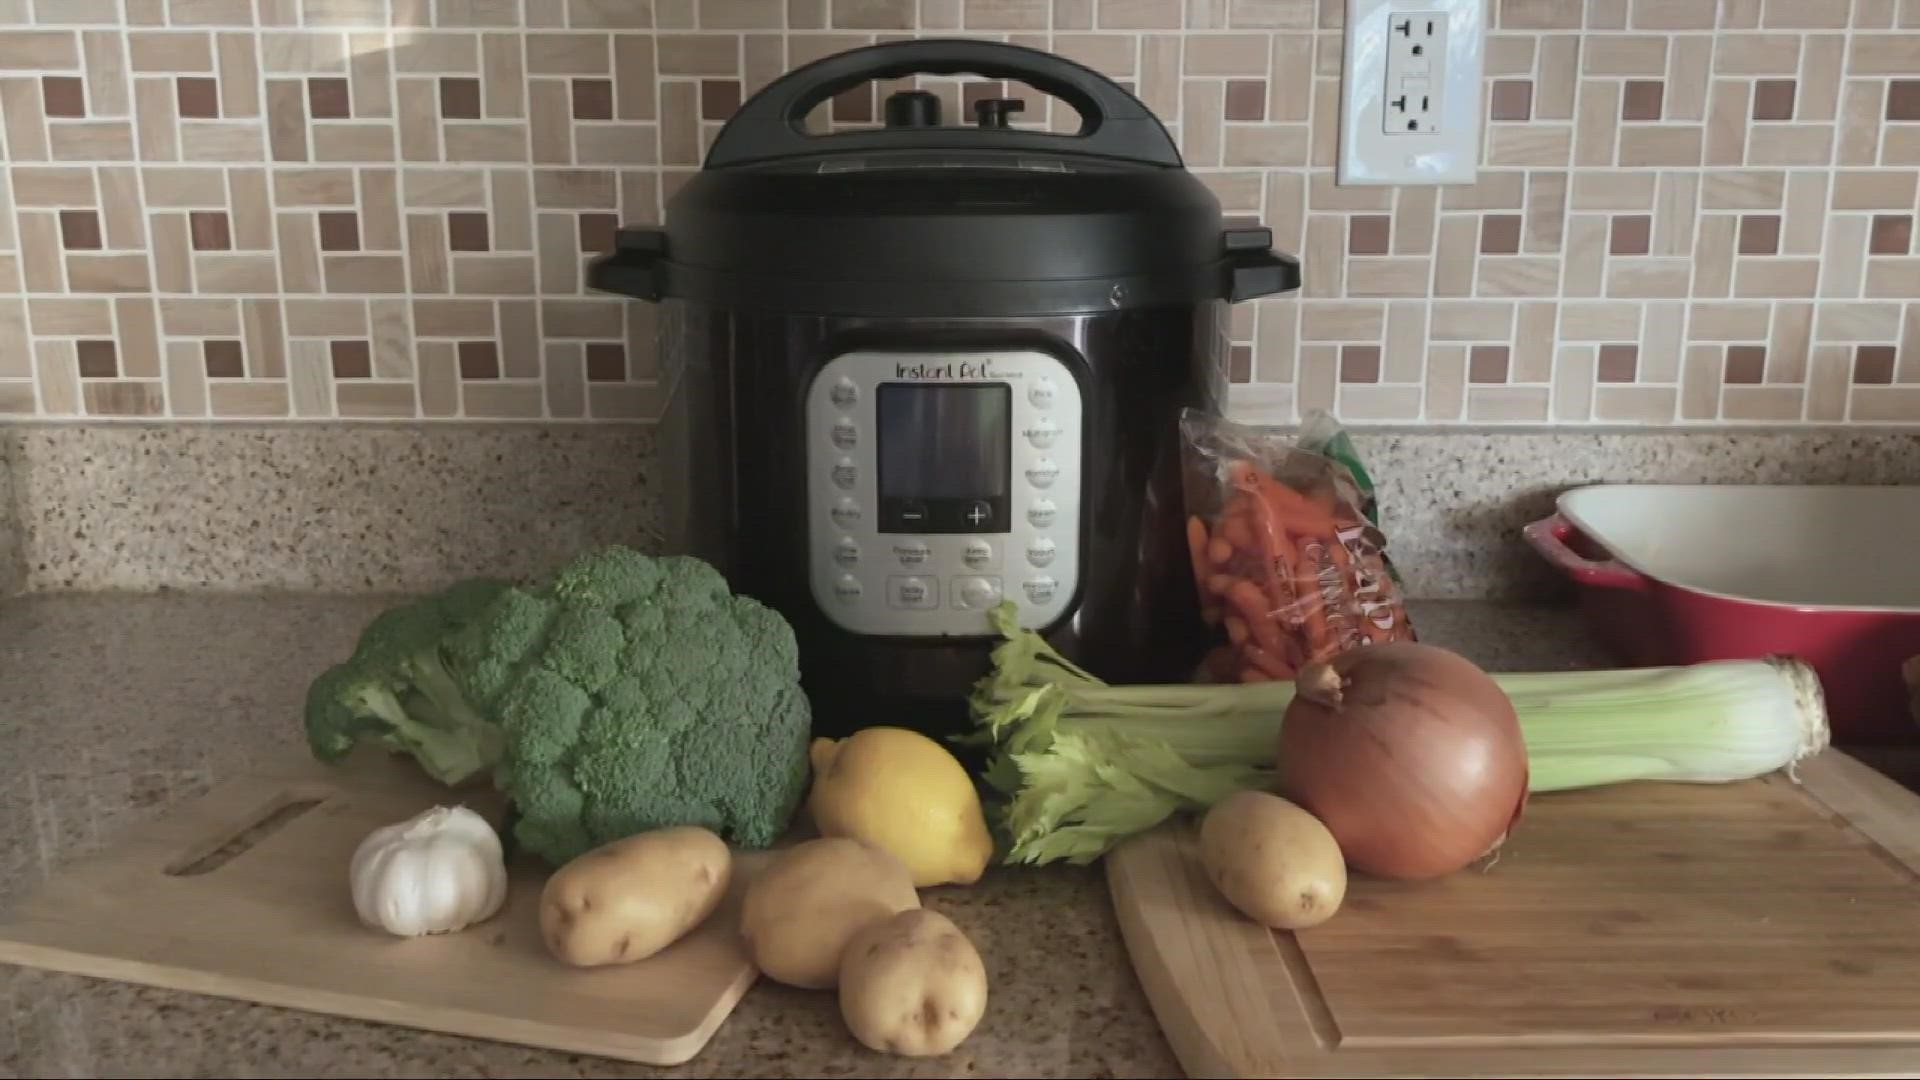 Consumer Reports has details on how to reinvigorate your love for small appliances that make life easier.